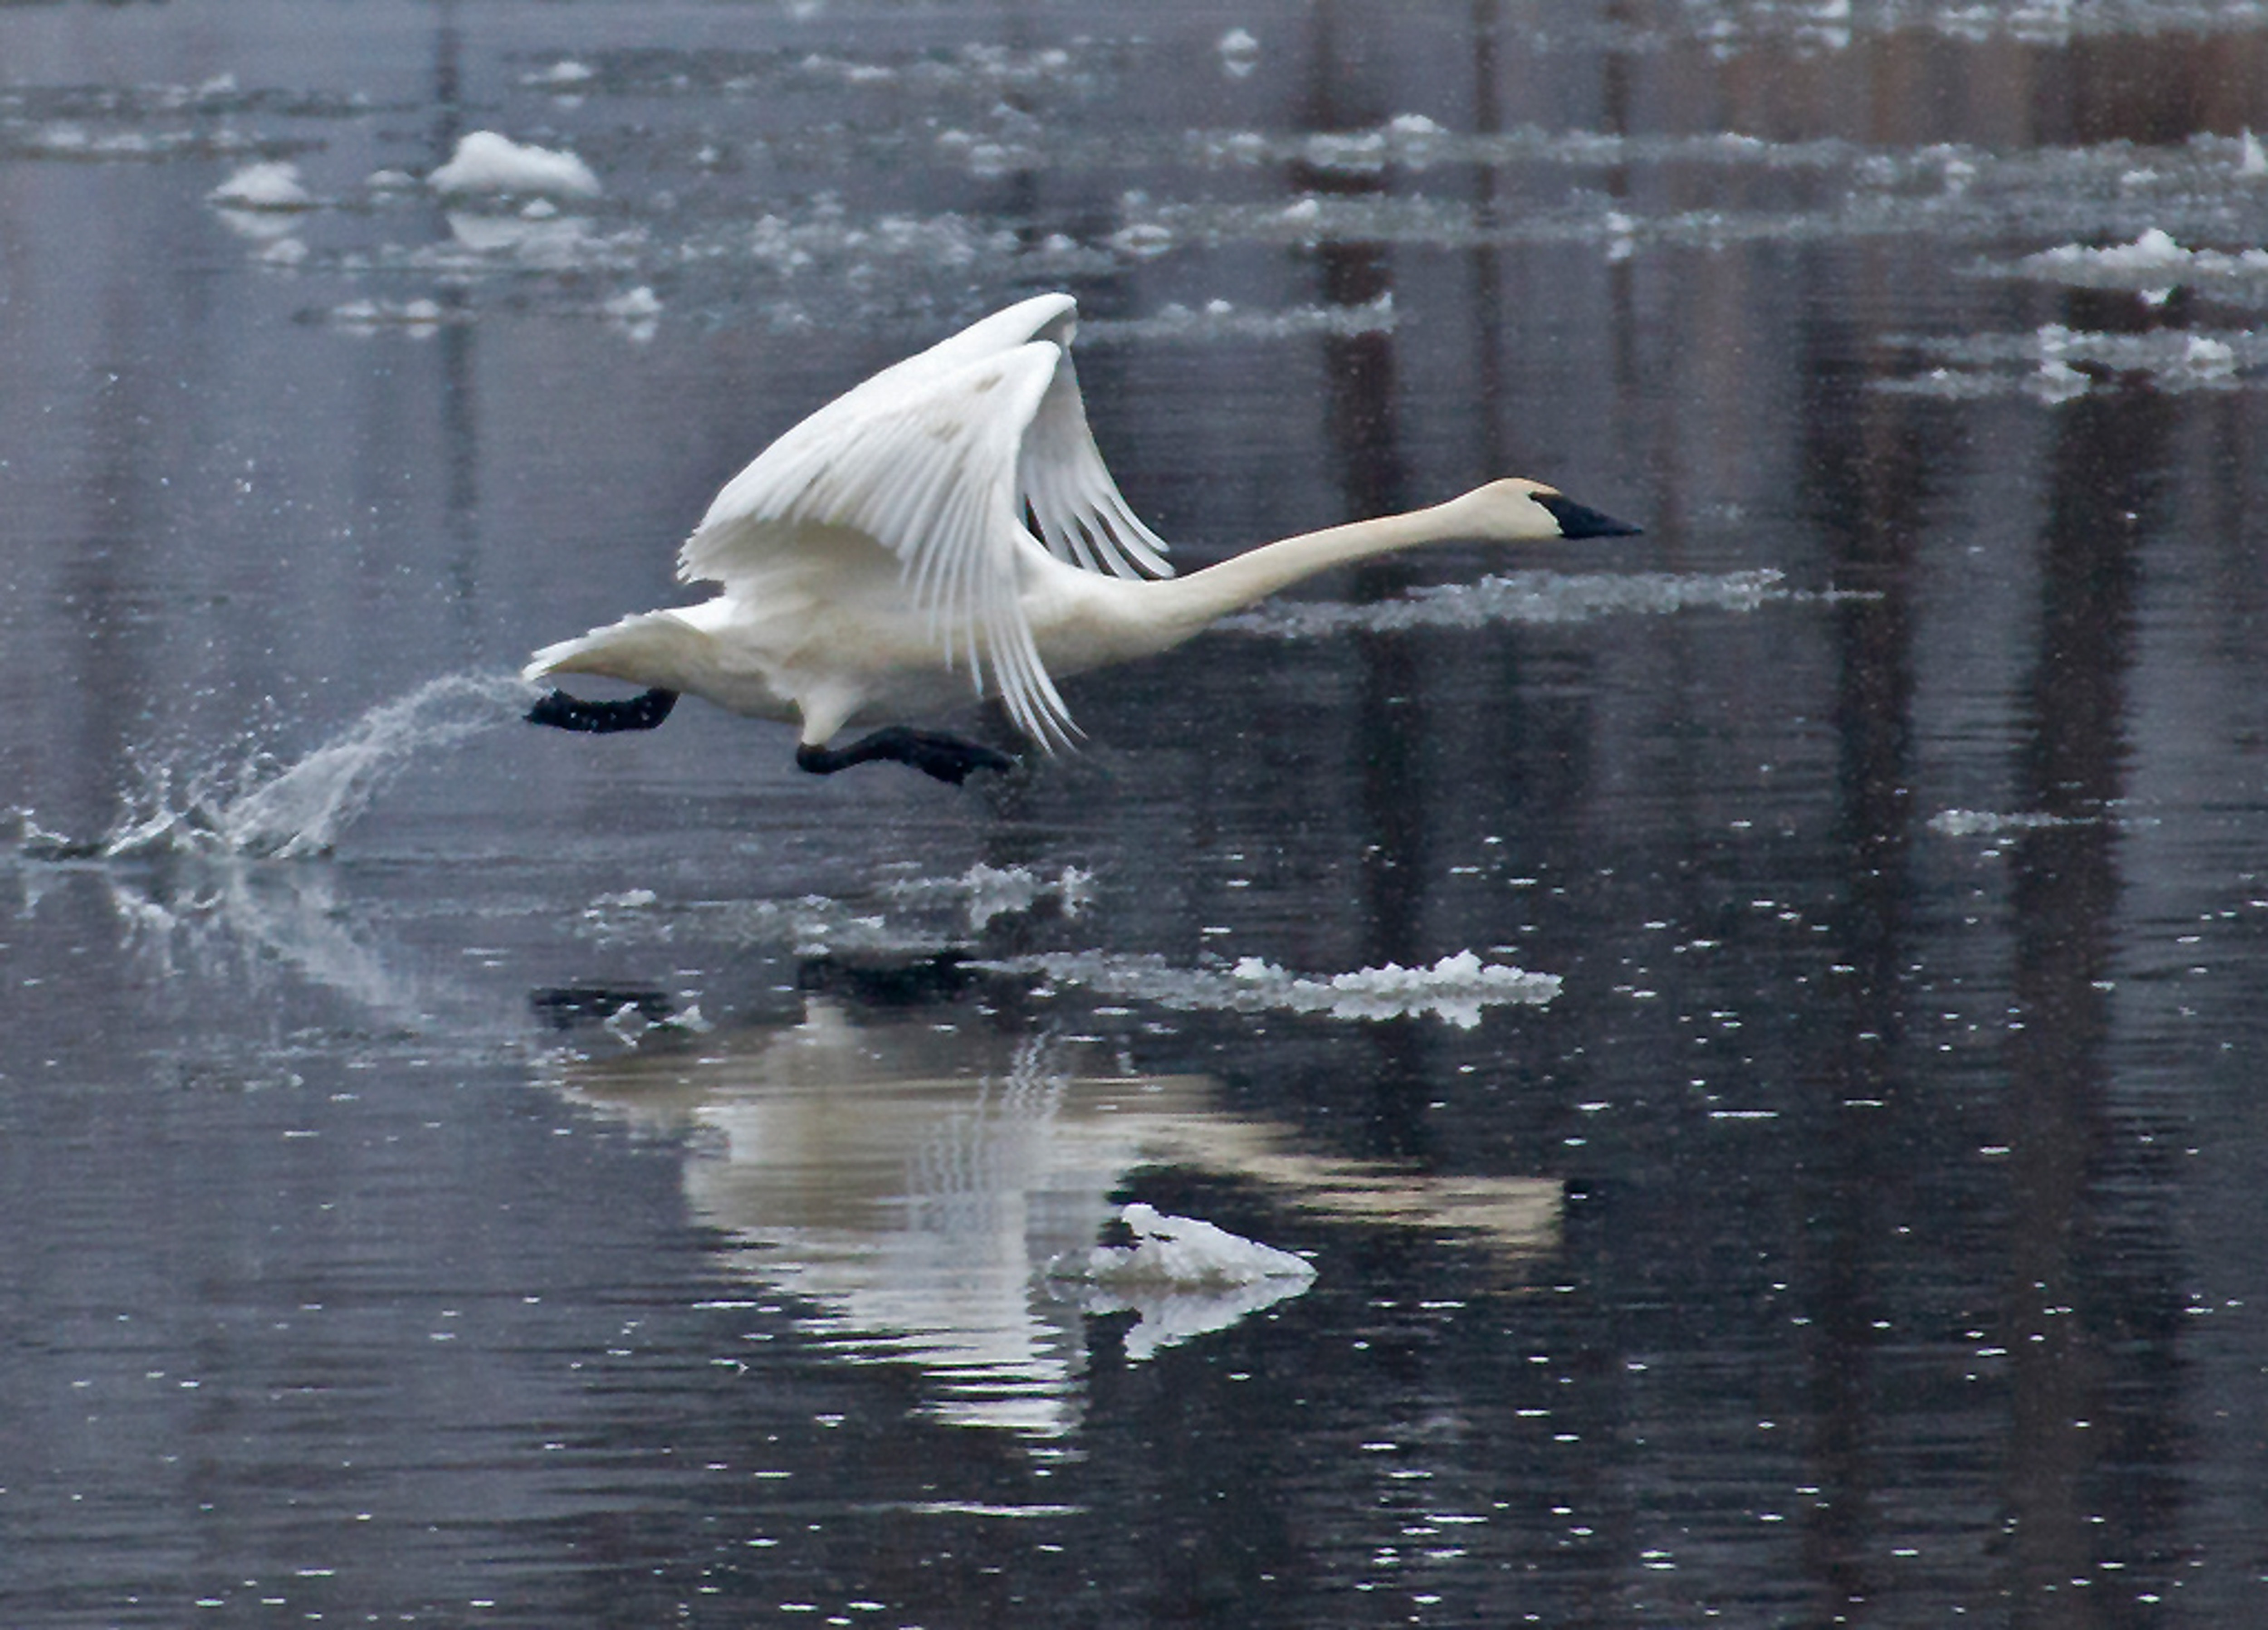 A trumpeter swan running across the surface of an icy pond with its wing outstretched.